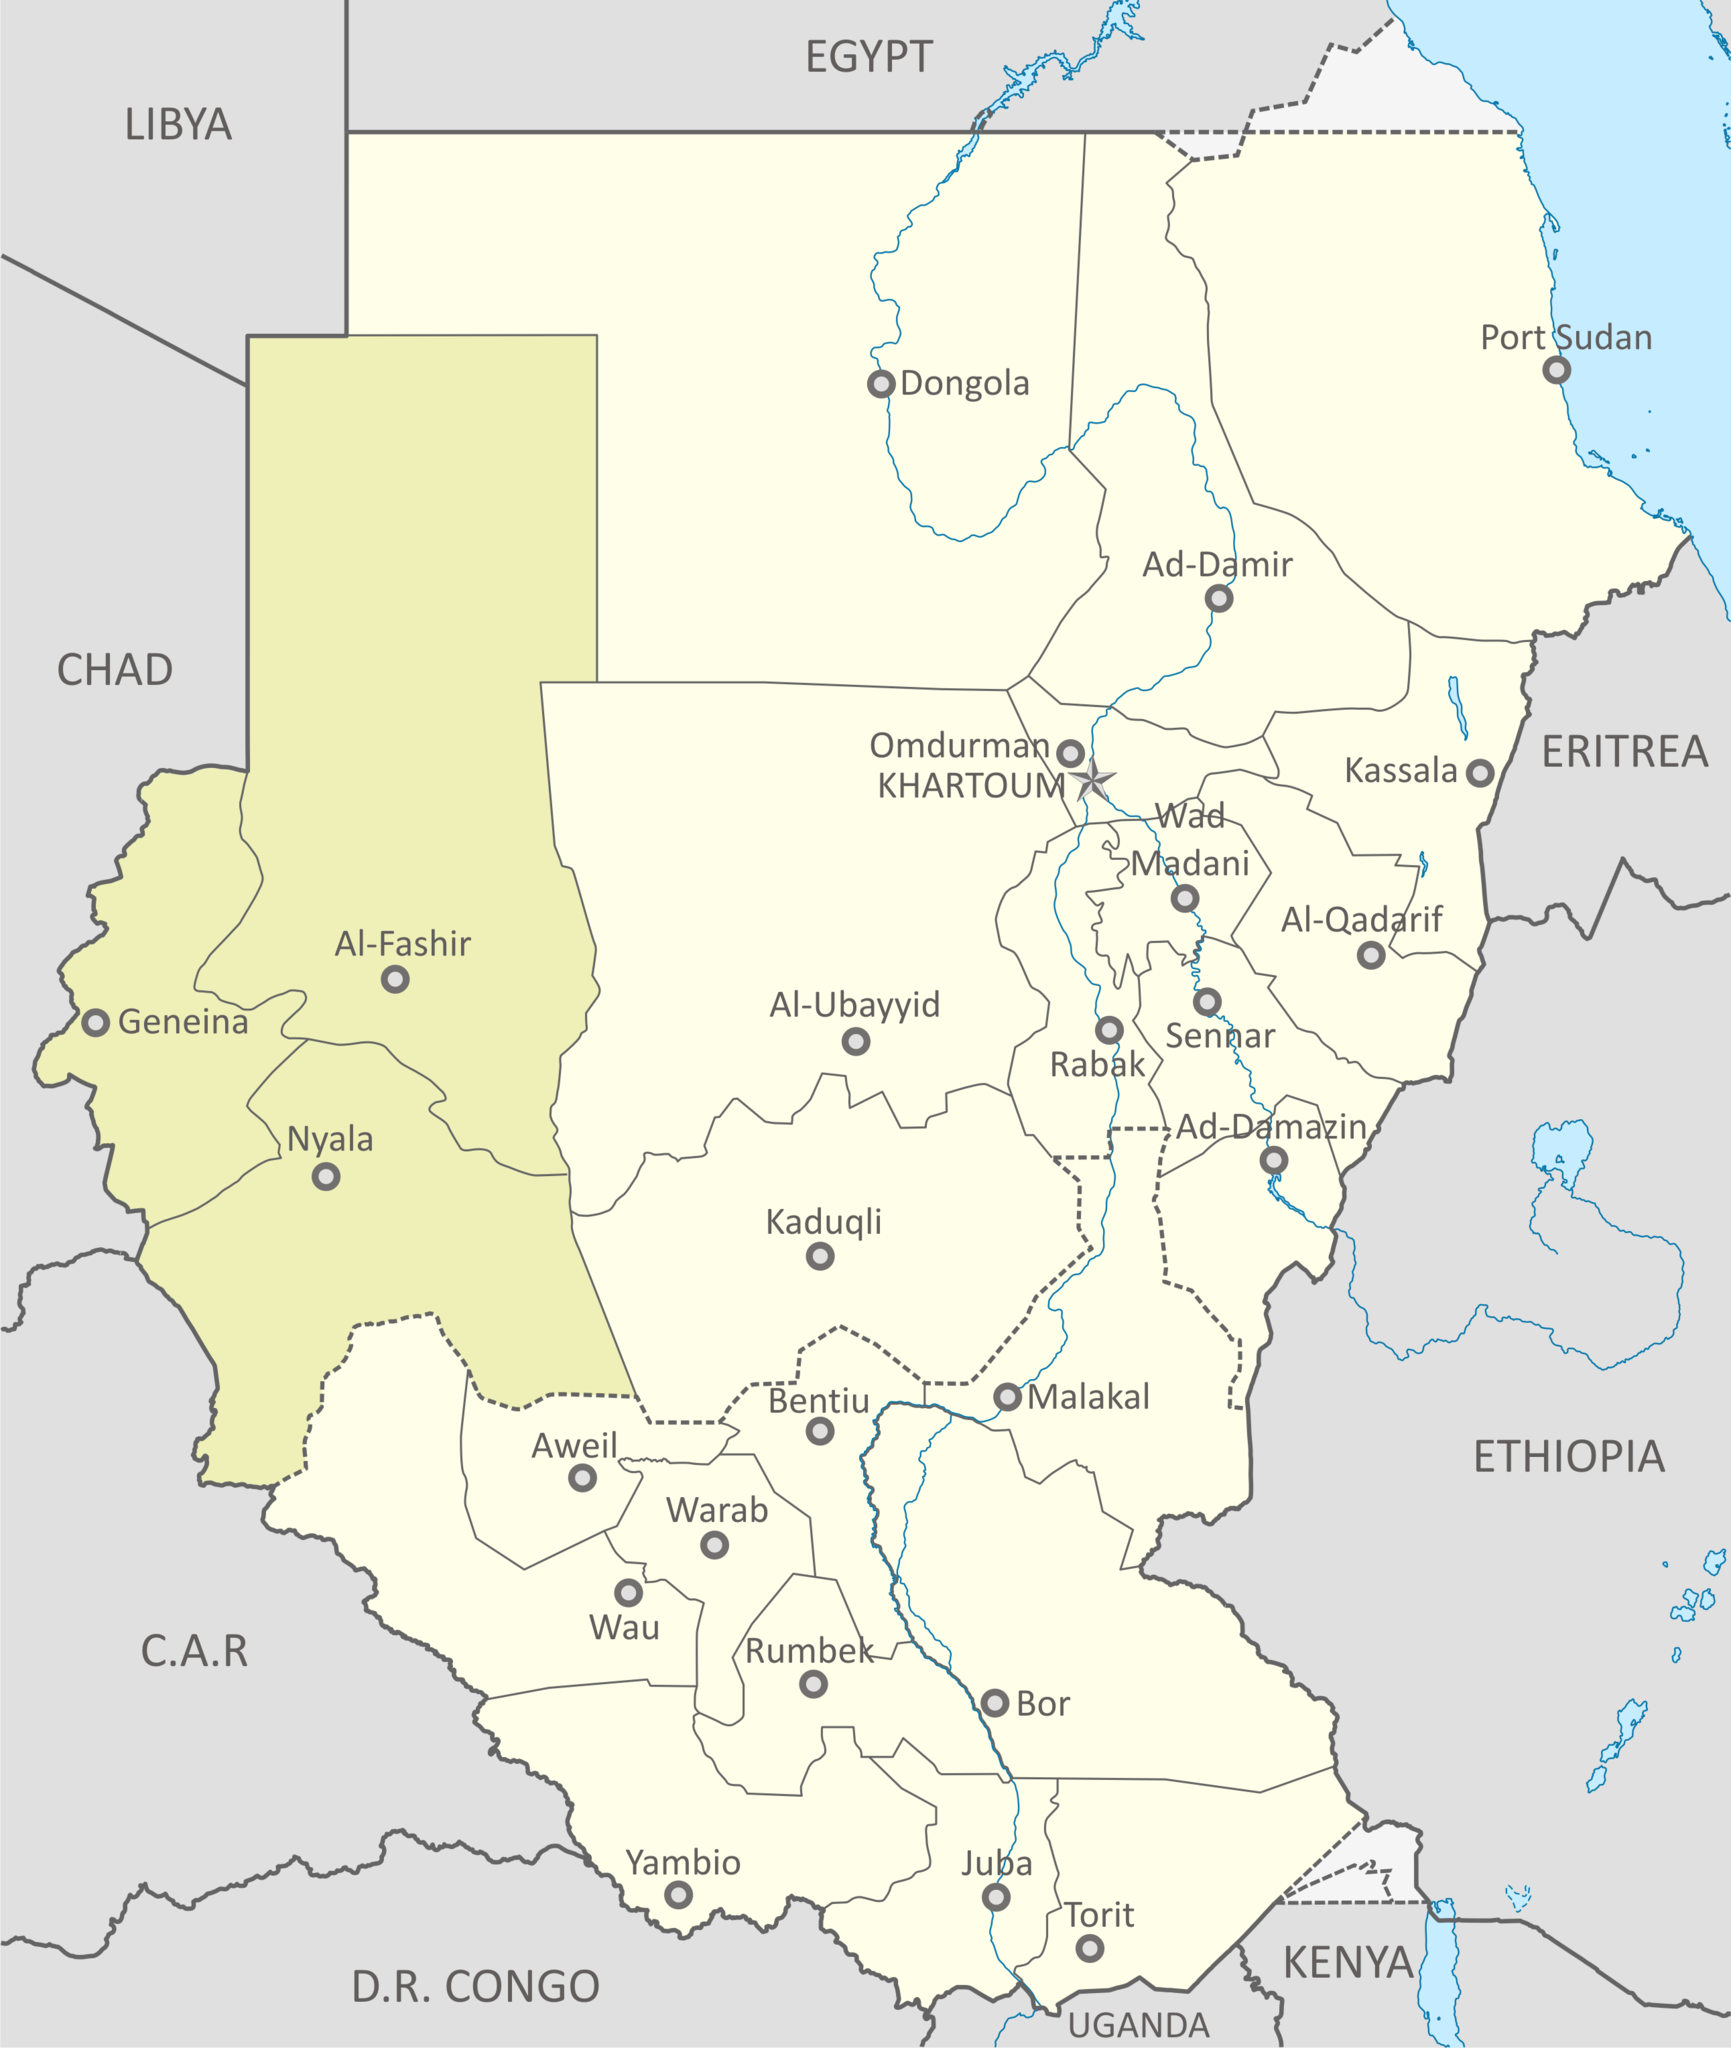 Map of Sudan with Darfur highlighted.